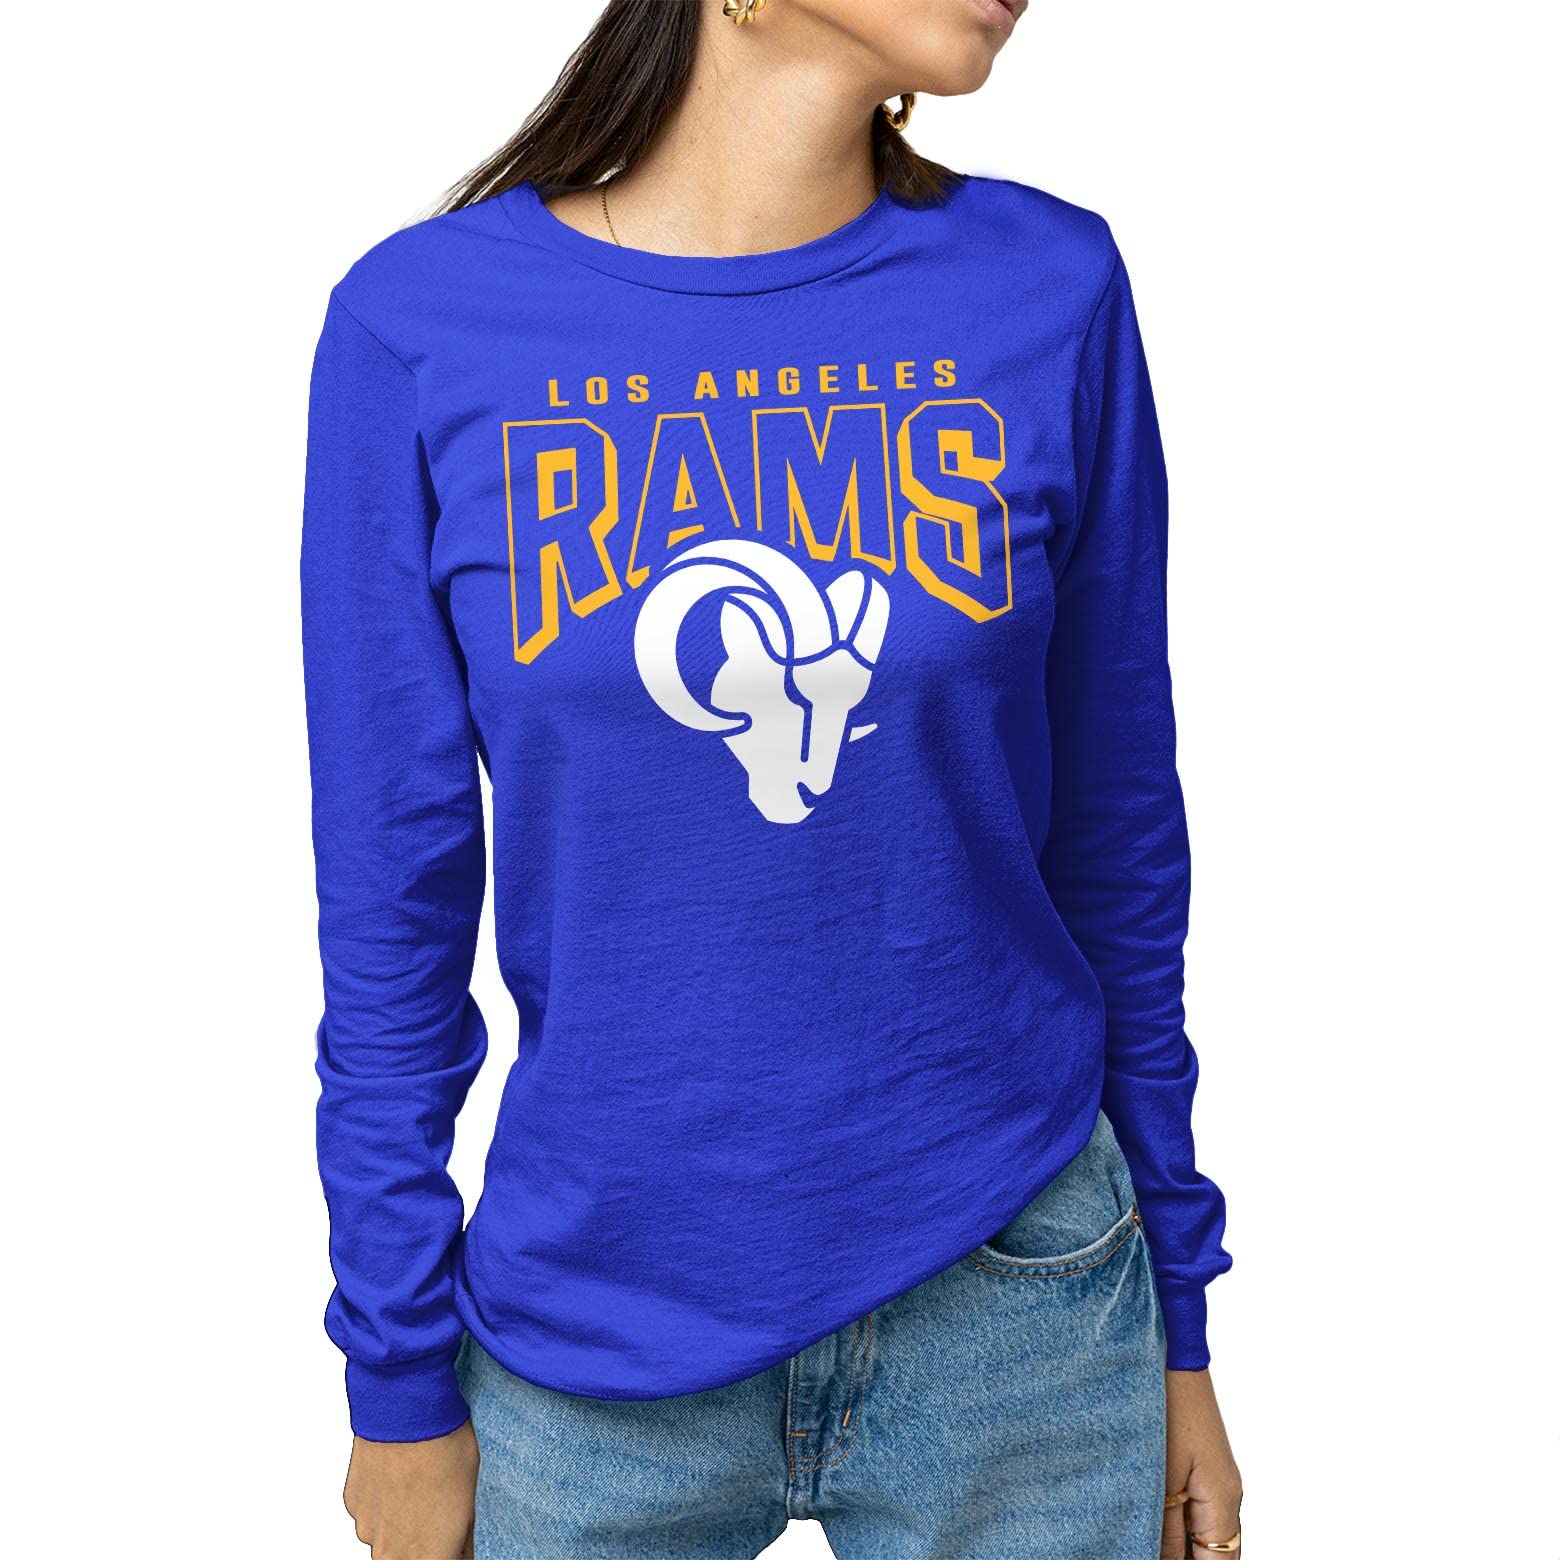 Junk Food Clothing x NFL - Los Angeles Rams - Bold Logo - Unisex Adult Long Sleeve T-Shirt for Men and Women - Size XX-Large